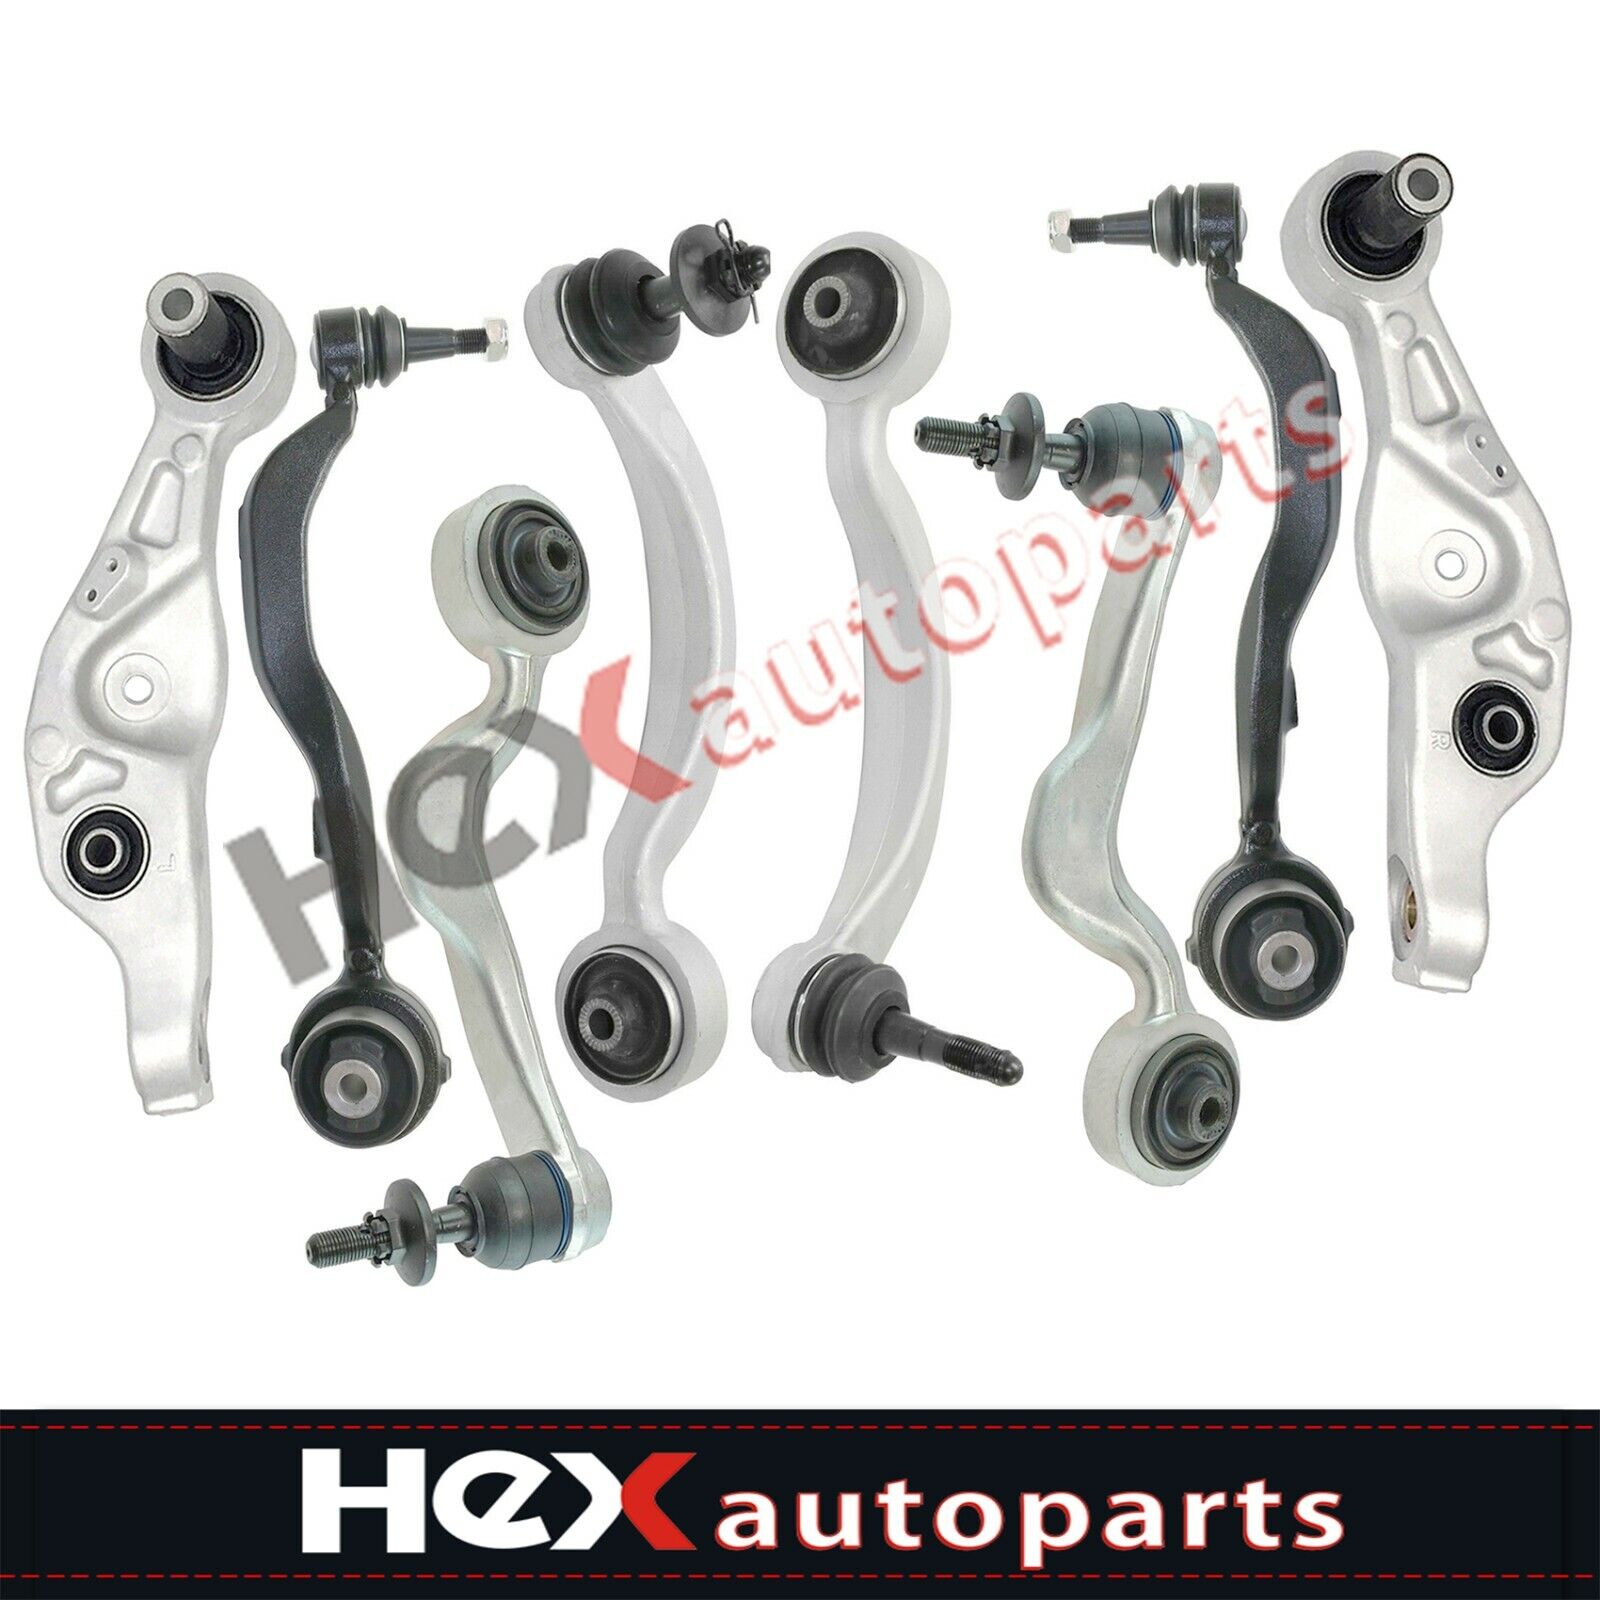 Lower Front&Upper Control Arm Kit for Lexus LS460 2007-2013 2014 2015 2016 2017